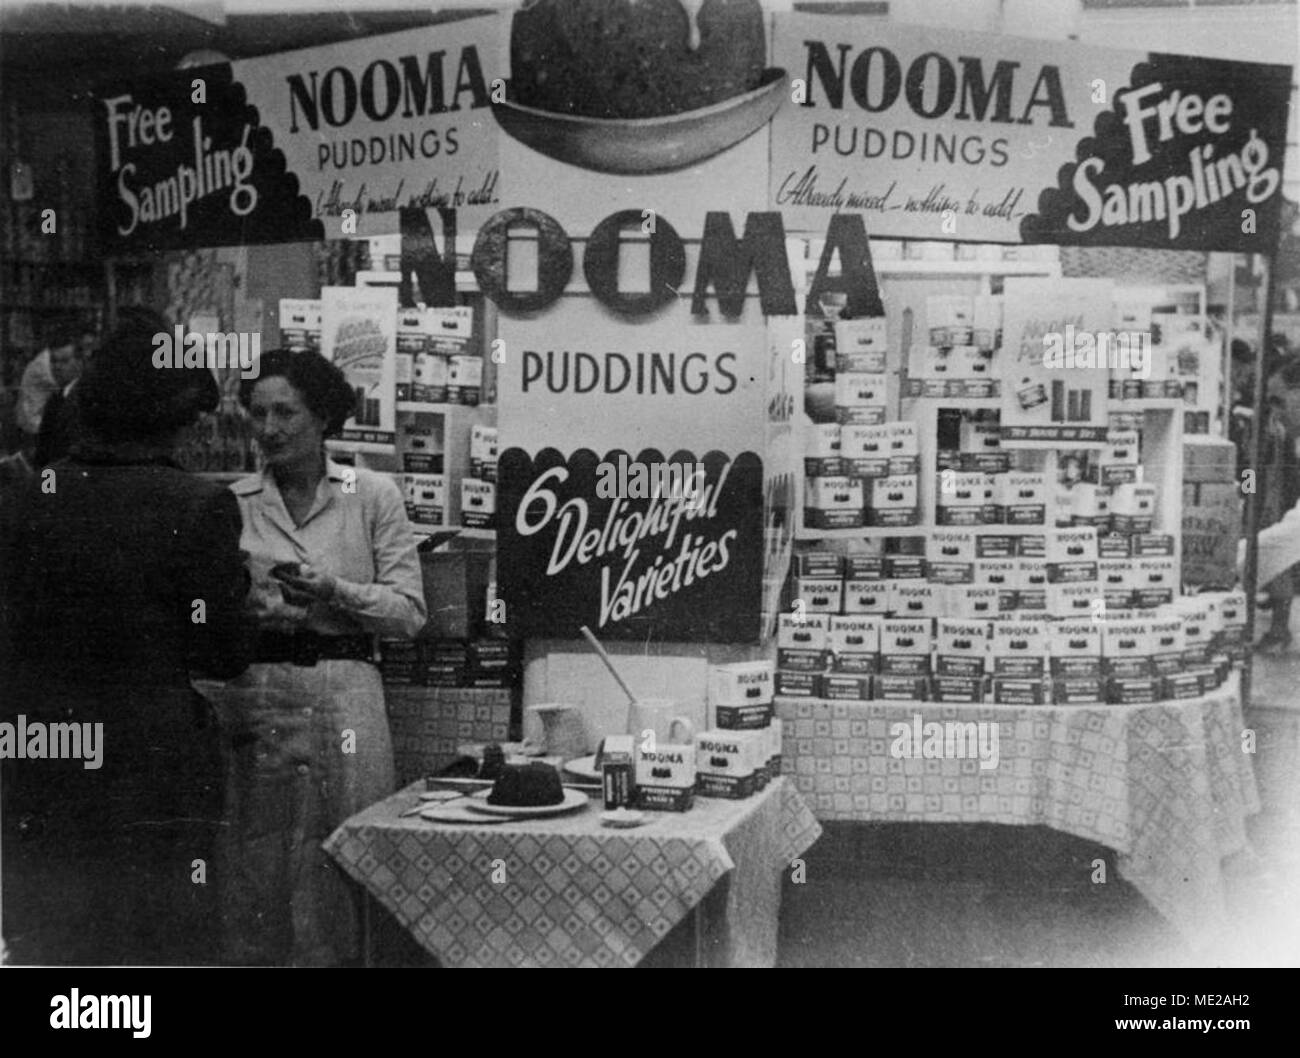 Demonstration of Nooma puddings at Myer Department store, 1952. Stock Photo